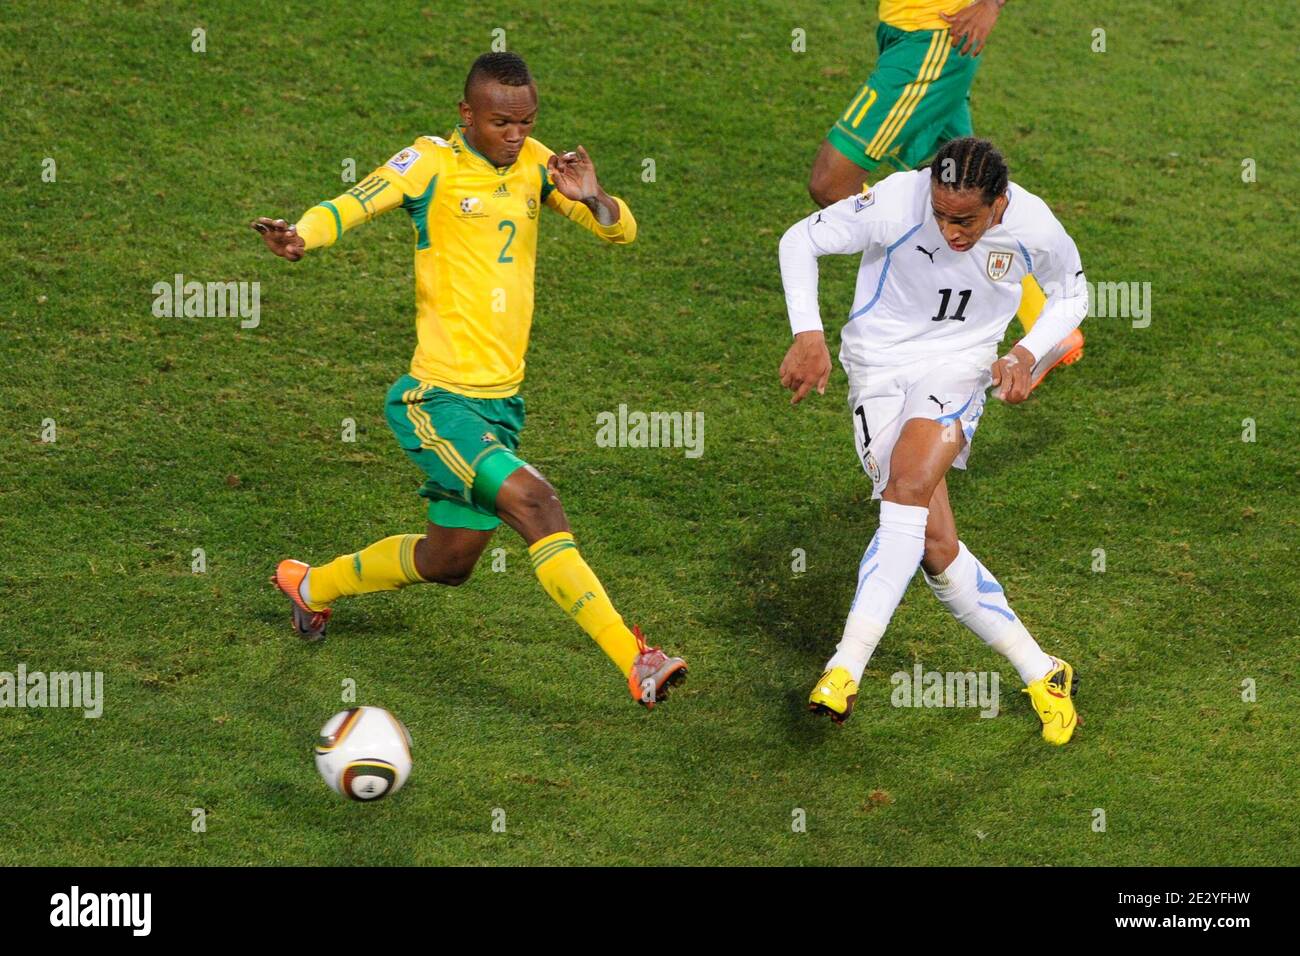 Uruguay's Alvaro Pereira battles for the ball with South Africa's Siboniso Gaxa during the 2010 FIFA World Cup South Africa Soccer match, group A, South Africa vs Uruguay at Loftus Versfeld football stadium in Pretoria, South Africa on June 16, 2010. Uruguay won 3-0. Photo by Henri Szwarc/ABACAPRESS.COM Stock Photo